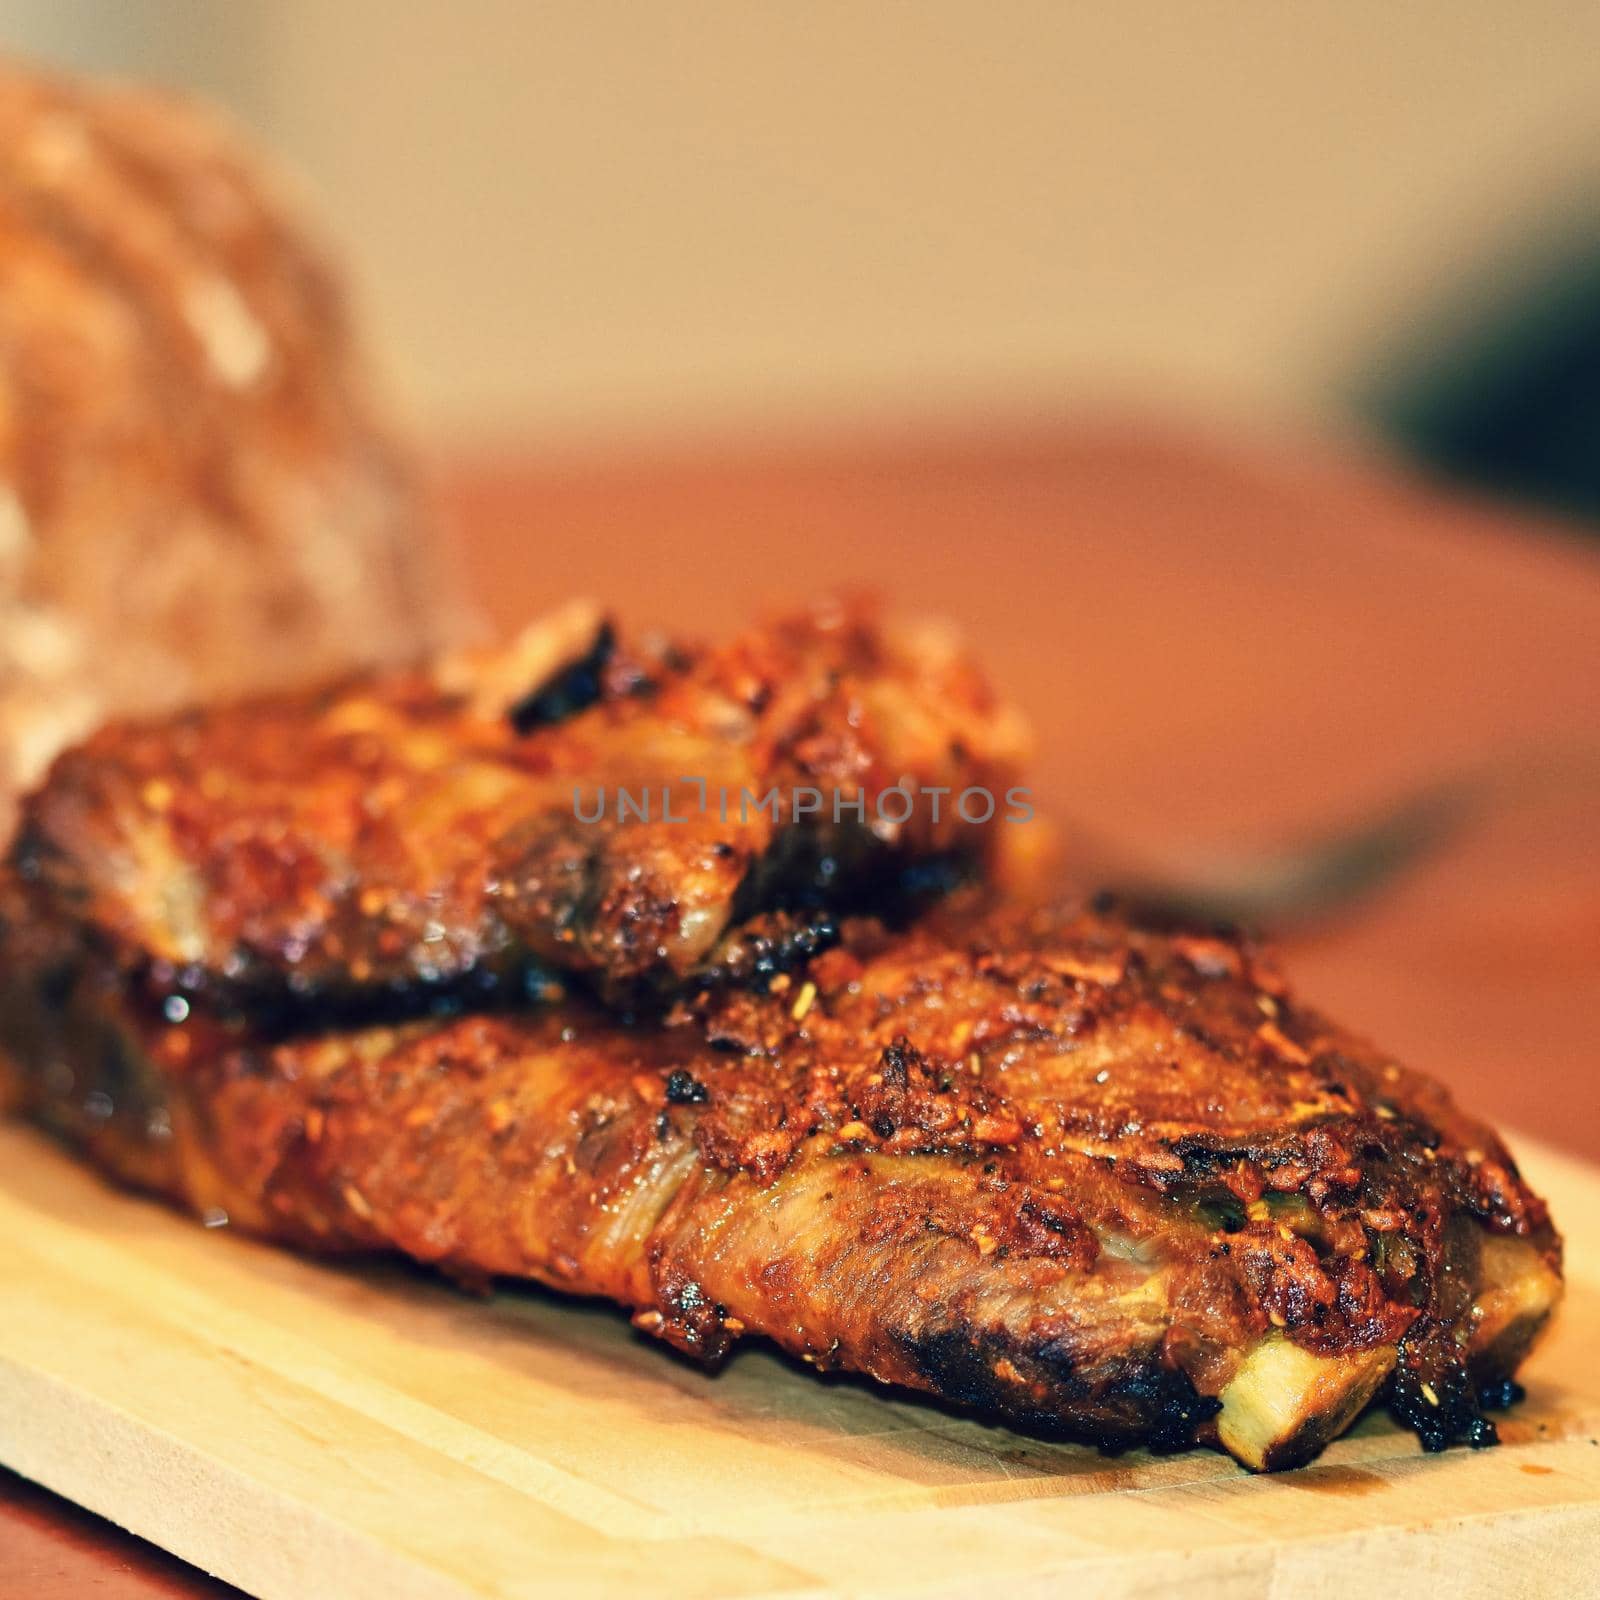 Roasted pork ribs. On wooden background bread.